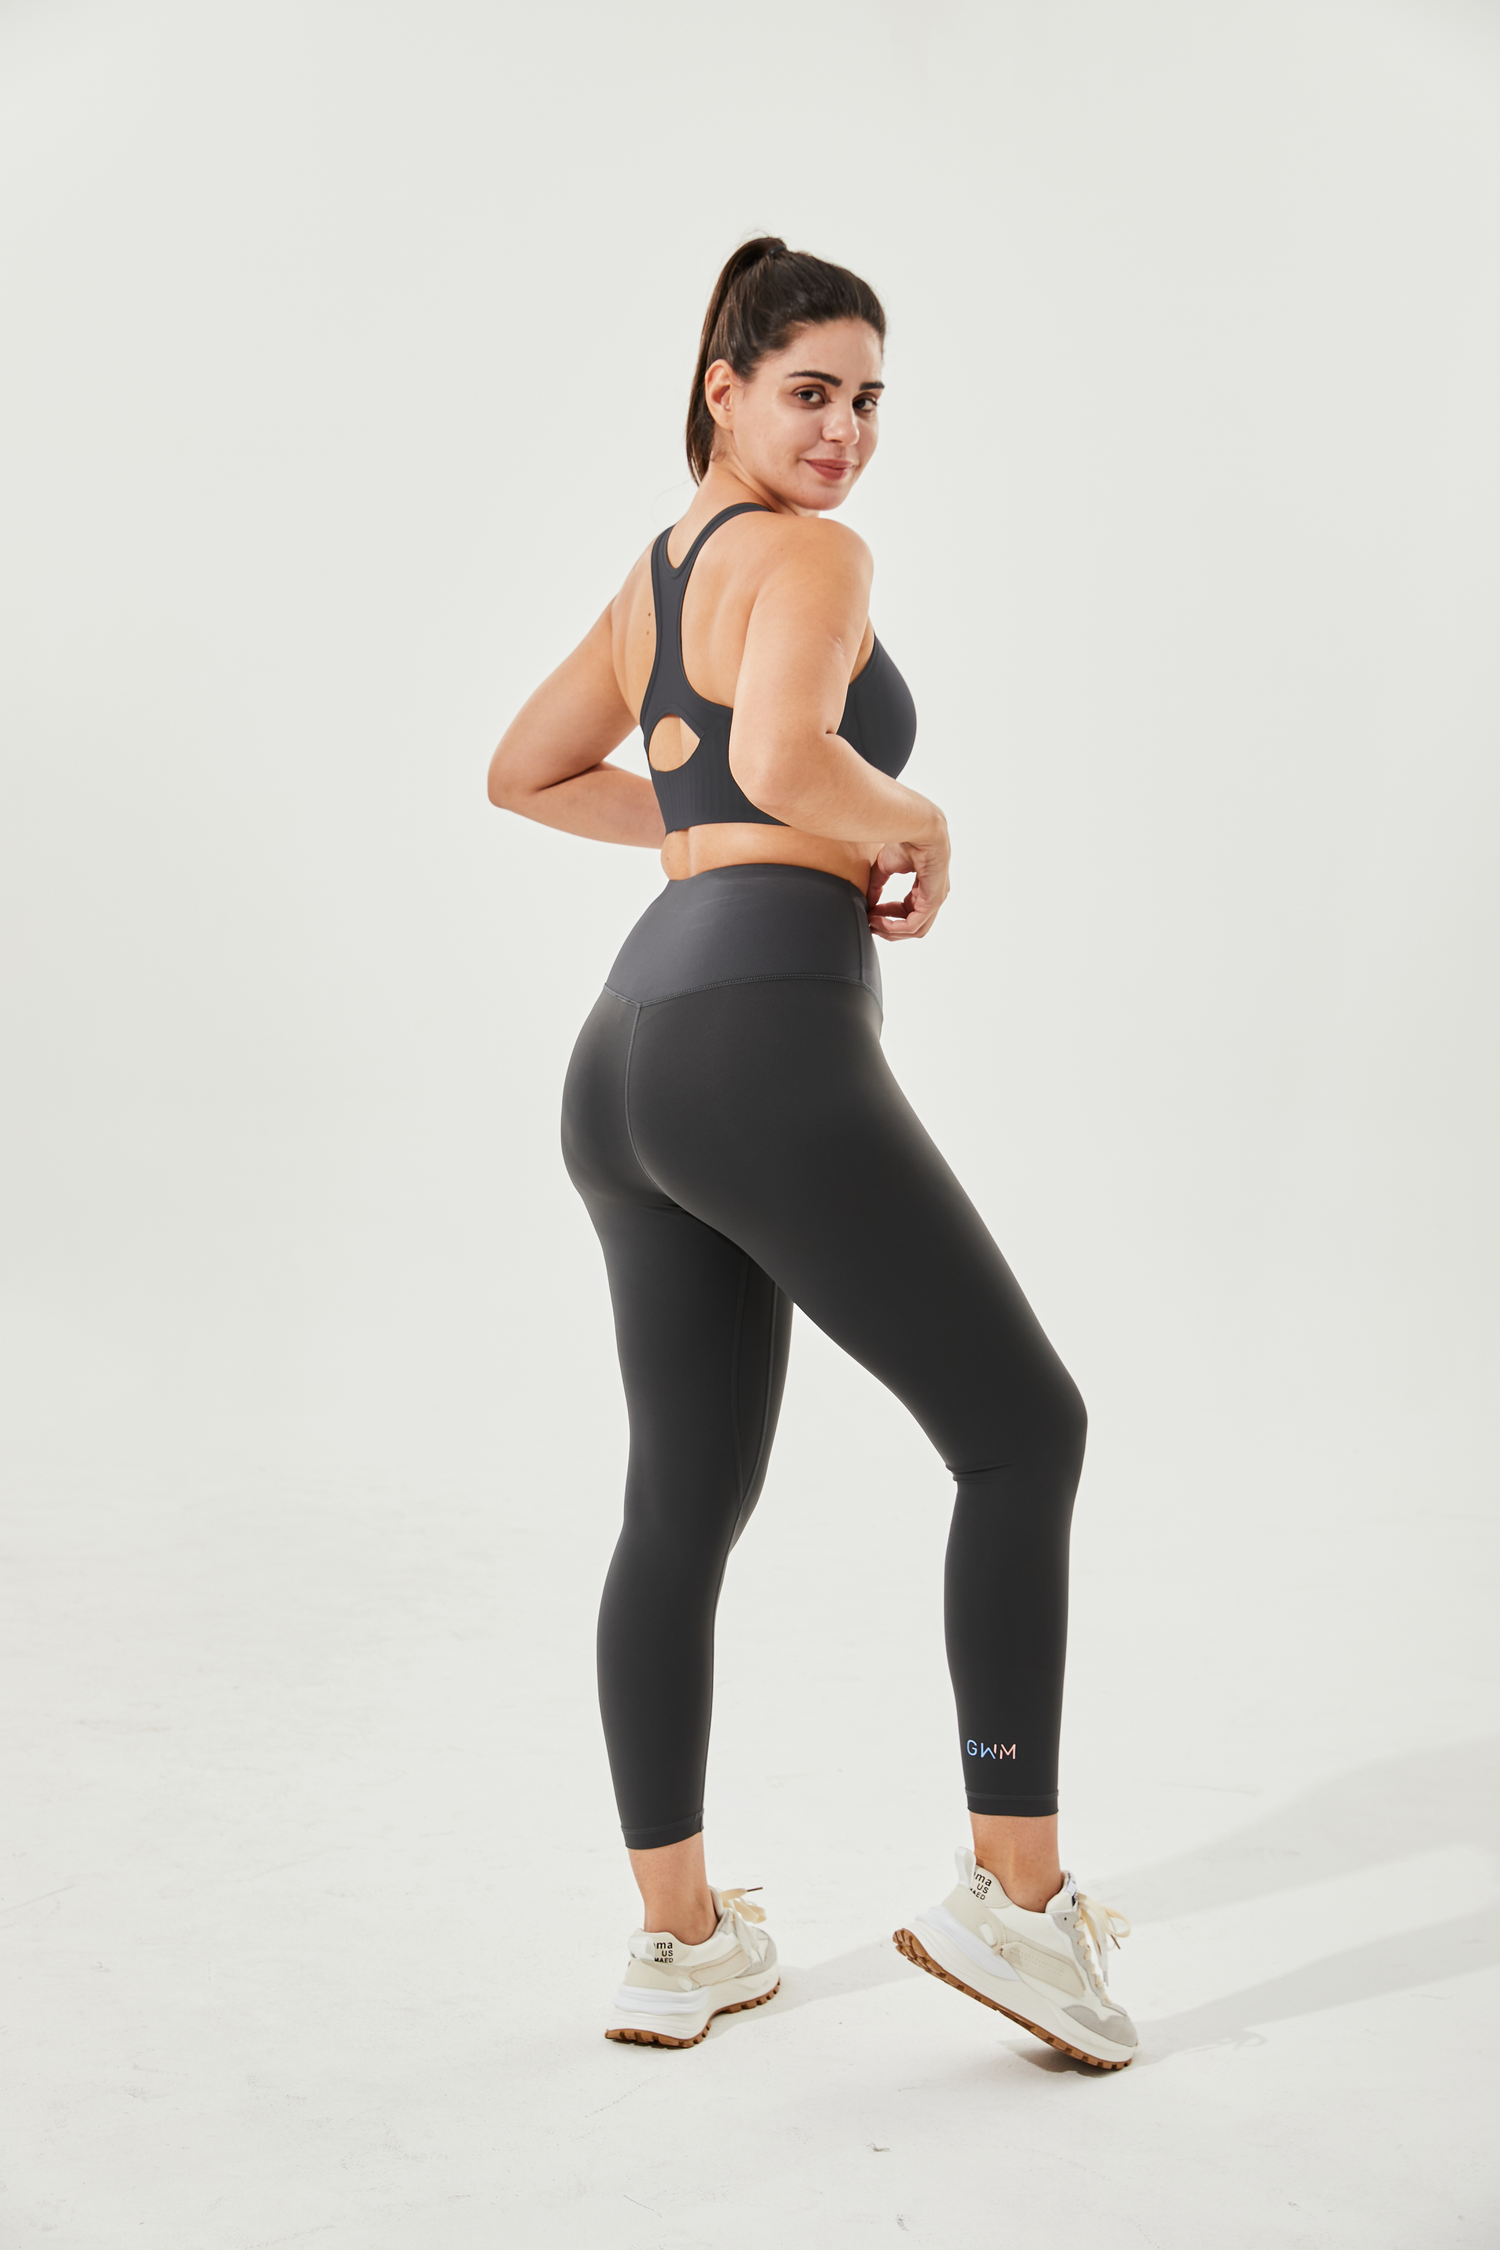 Buttery Soft Leggings For Women - High Waisted Tummy Control No